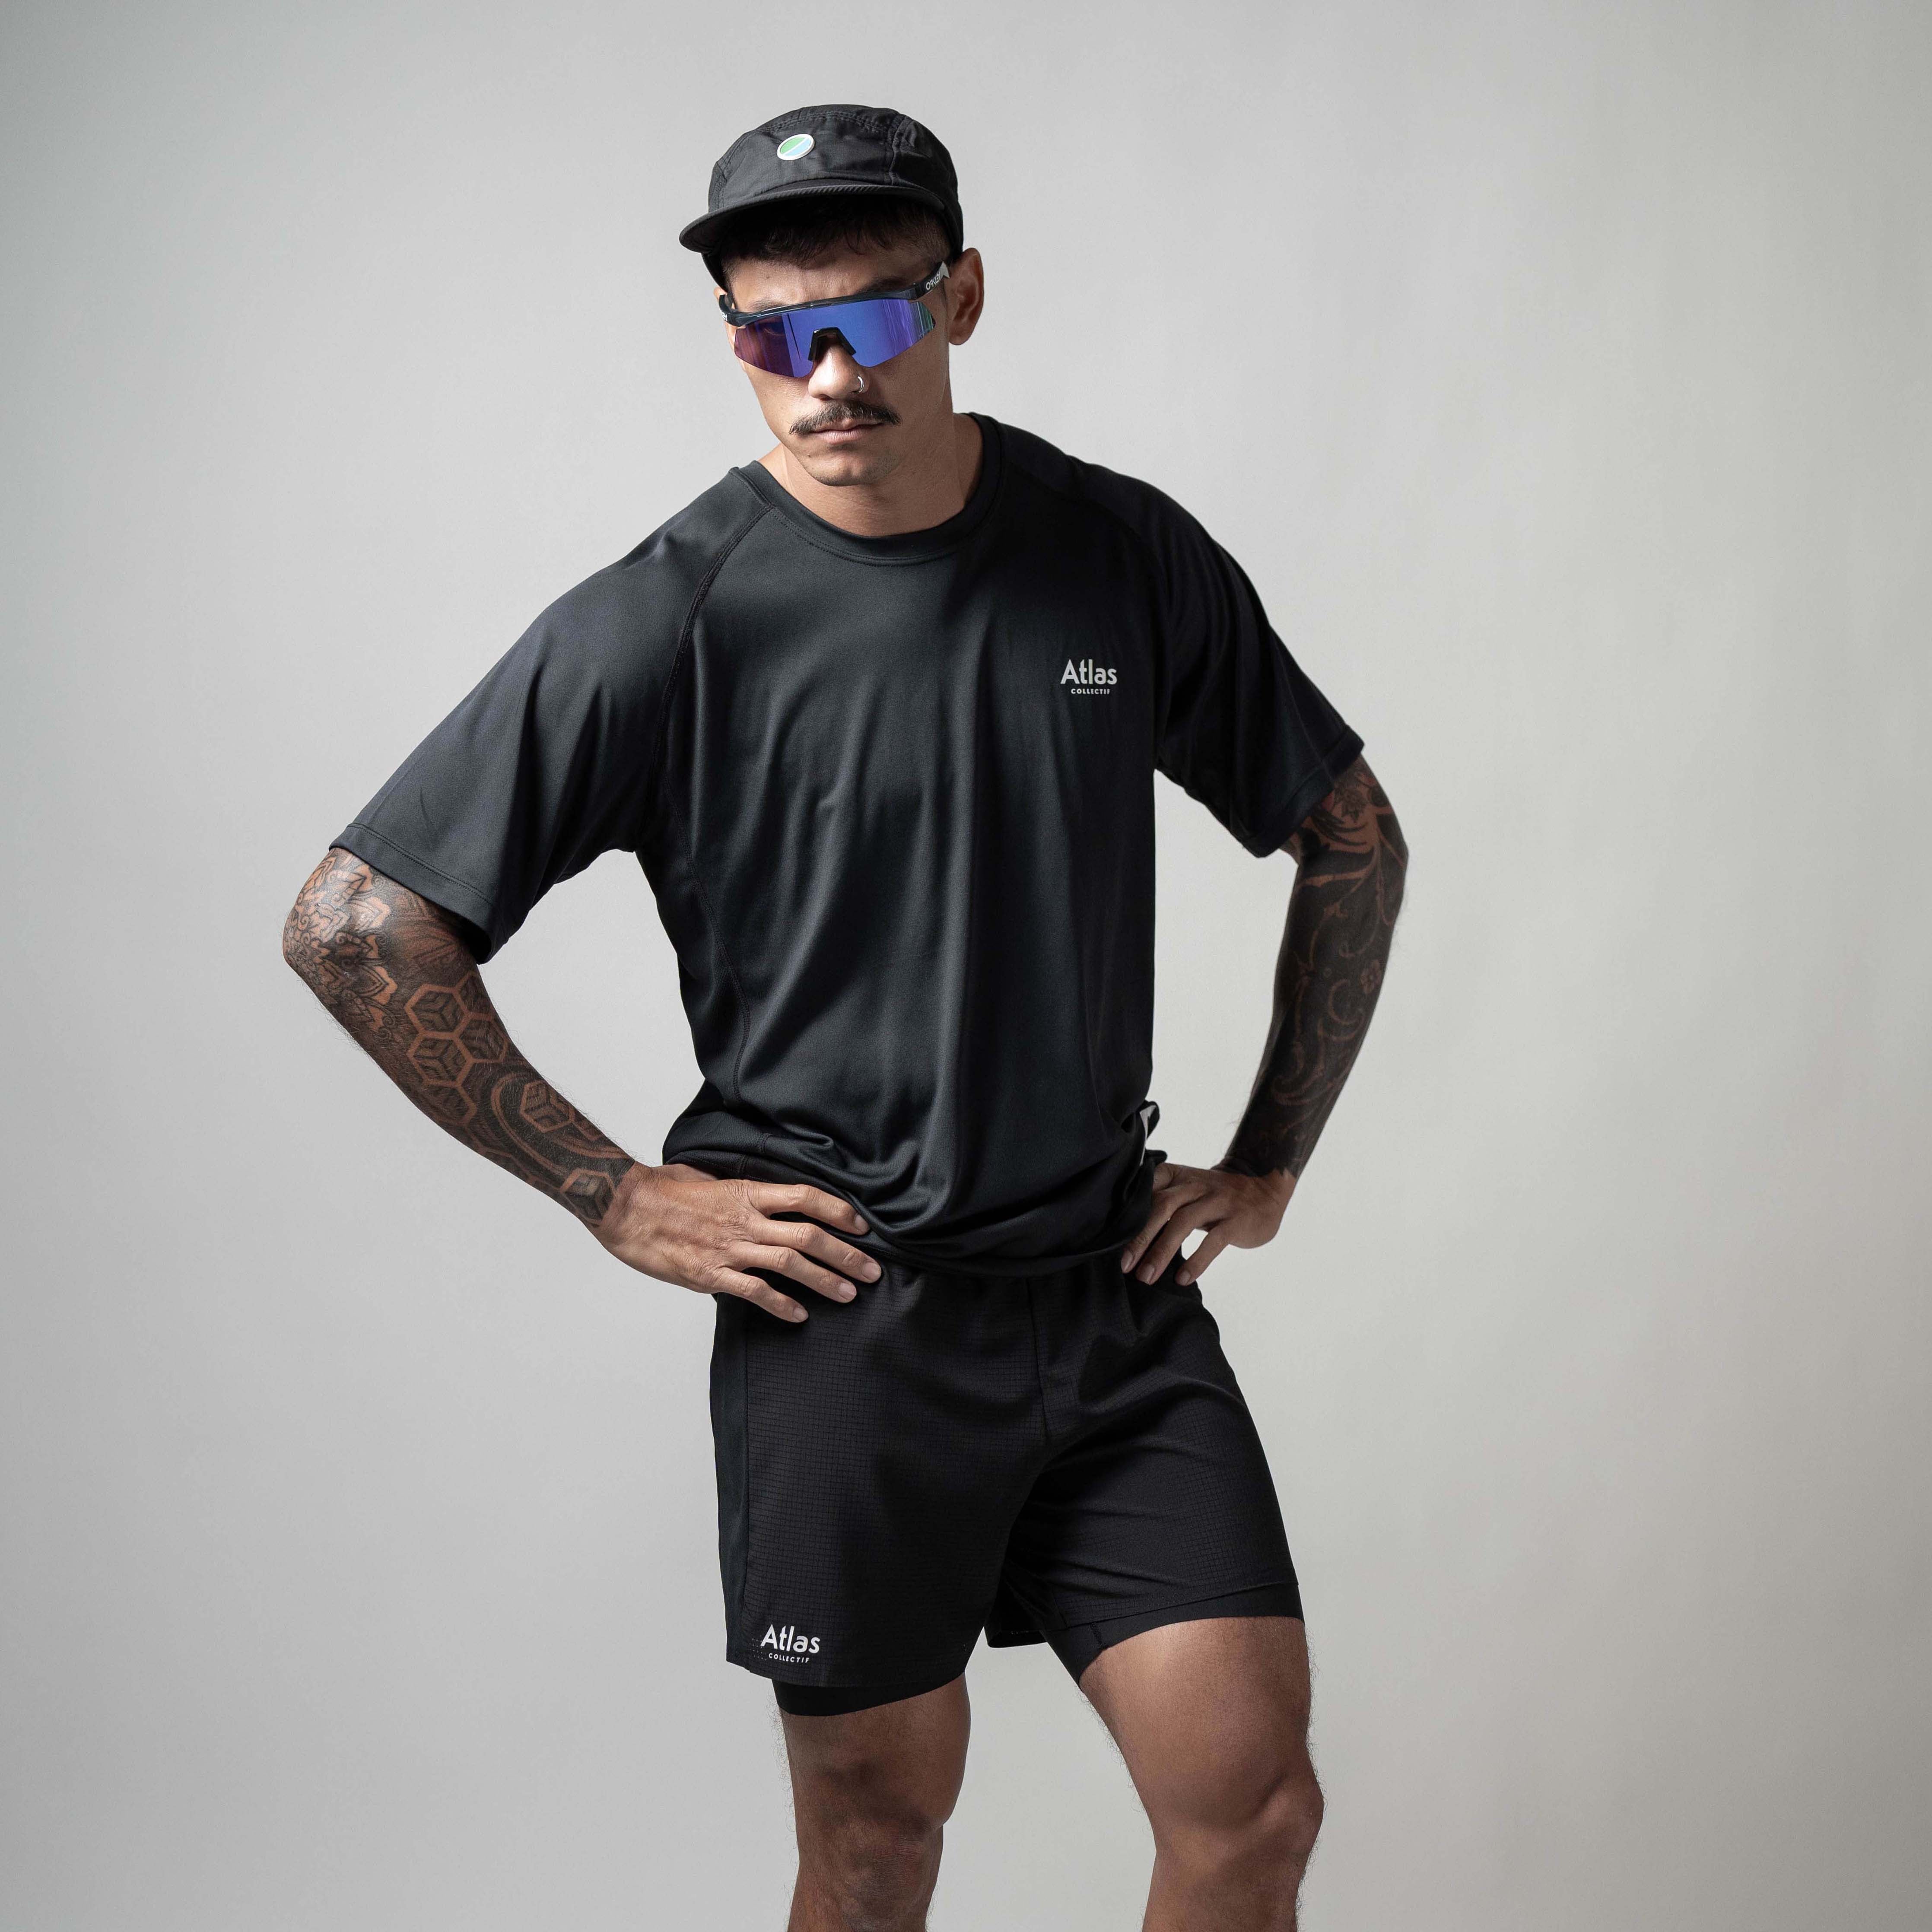 Atlas Core - 1 Running Black in Collectif 2 Shorts